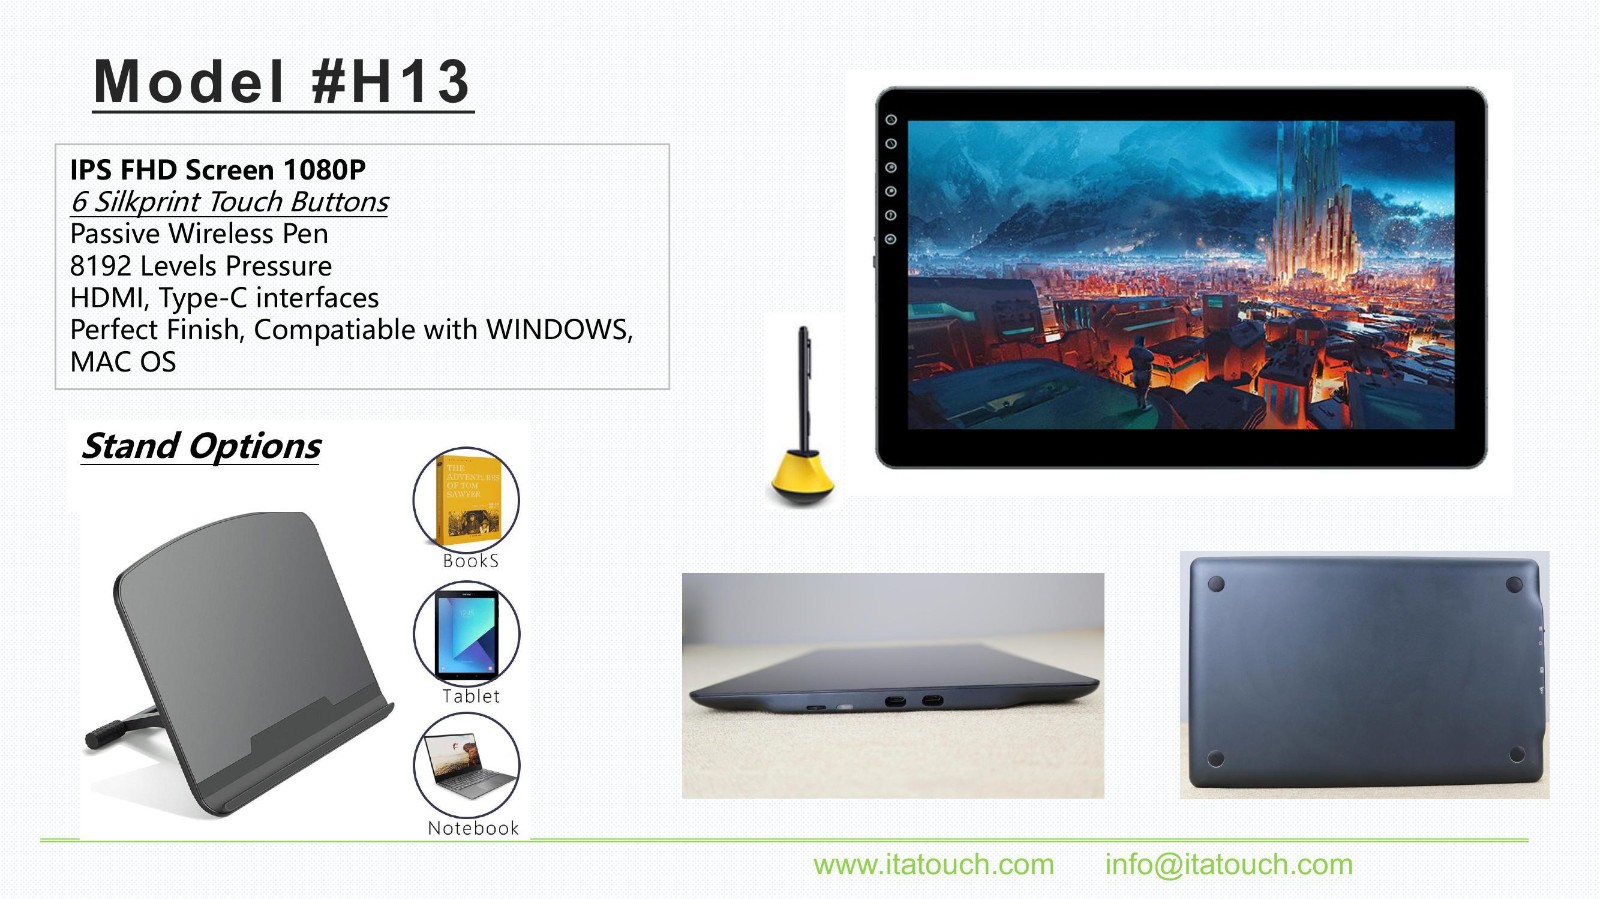 news-ITATOUCH-215INCH ELECTROMAGNETICAL ALL IN ONE DISPLAY-img-1